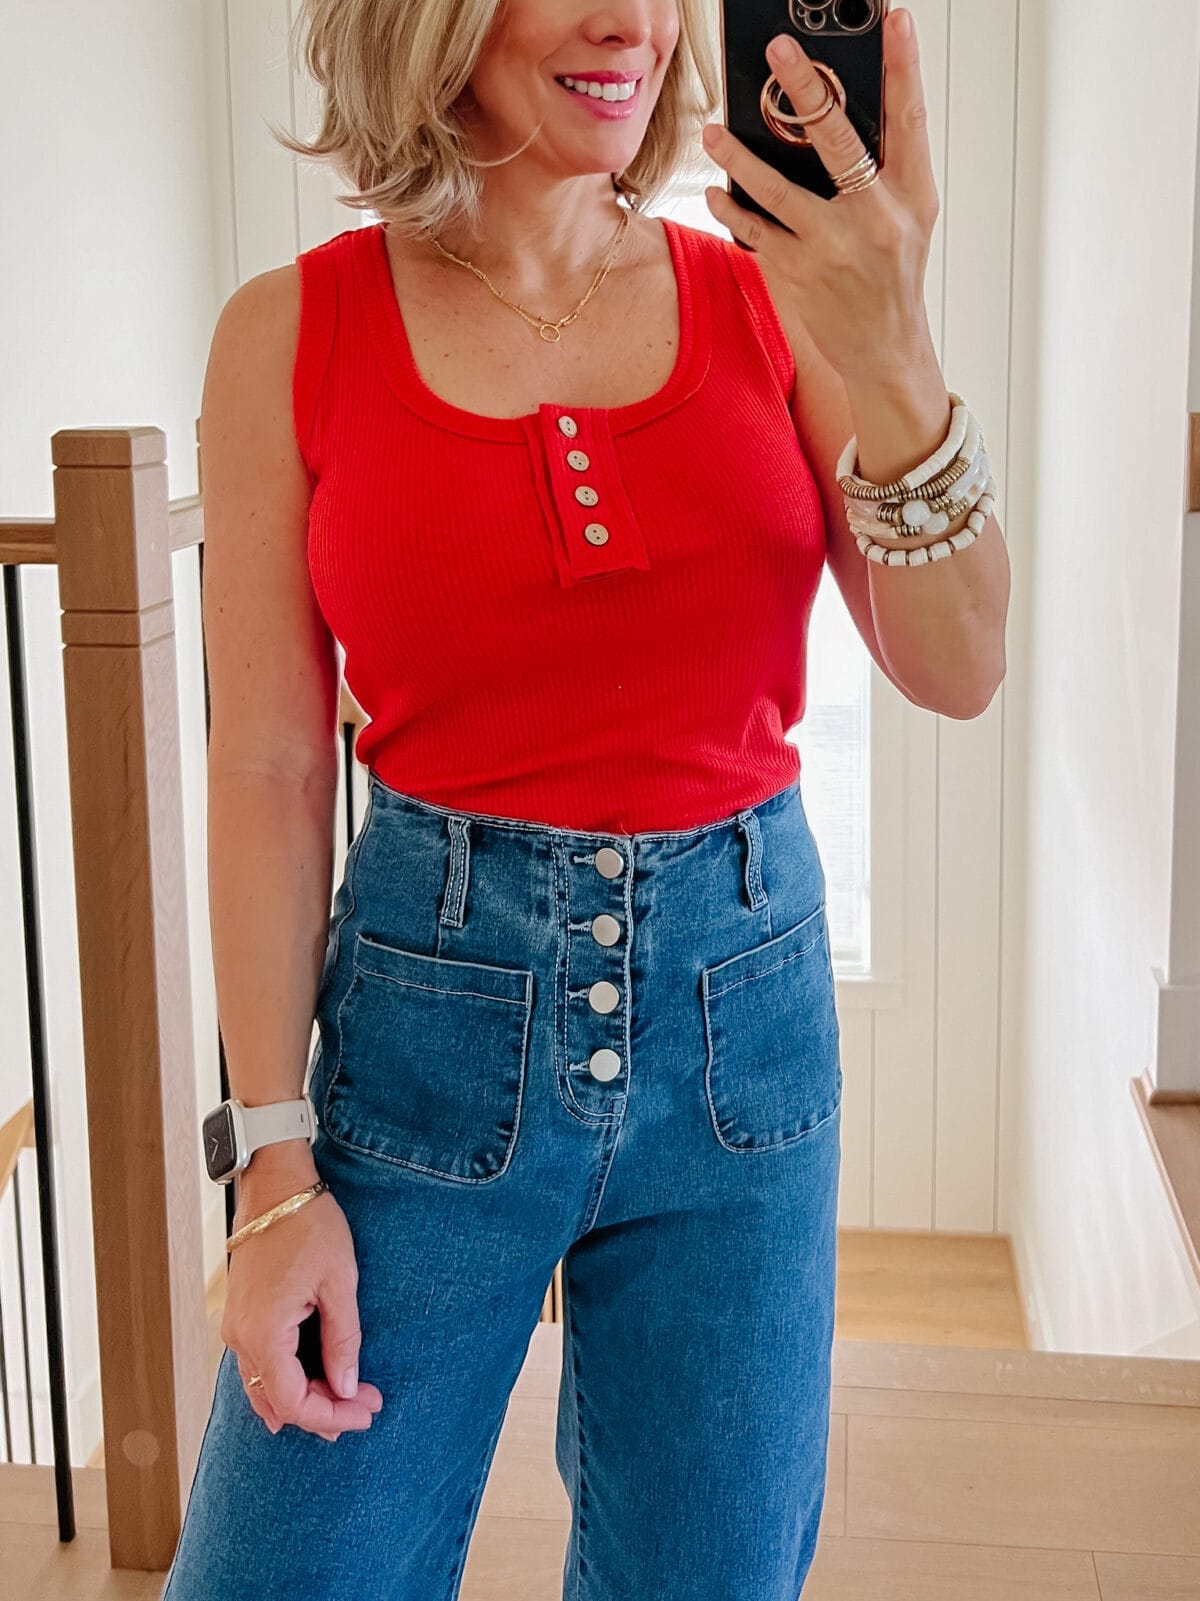 Red Henley Tank, Button Front Jeans, Studded Sandals 